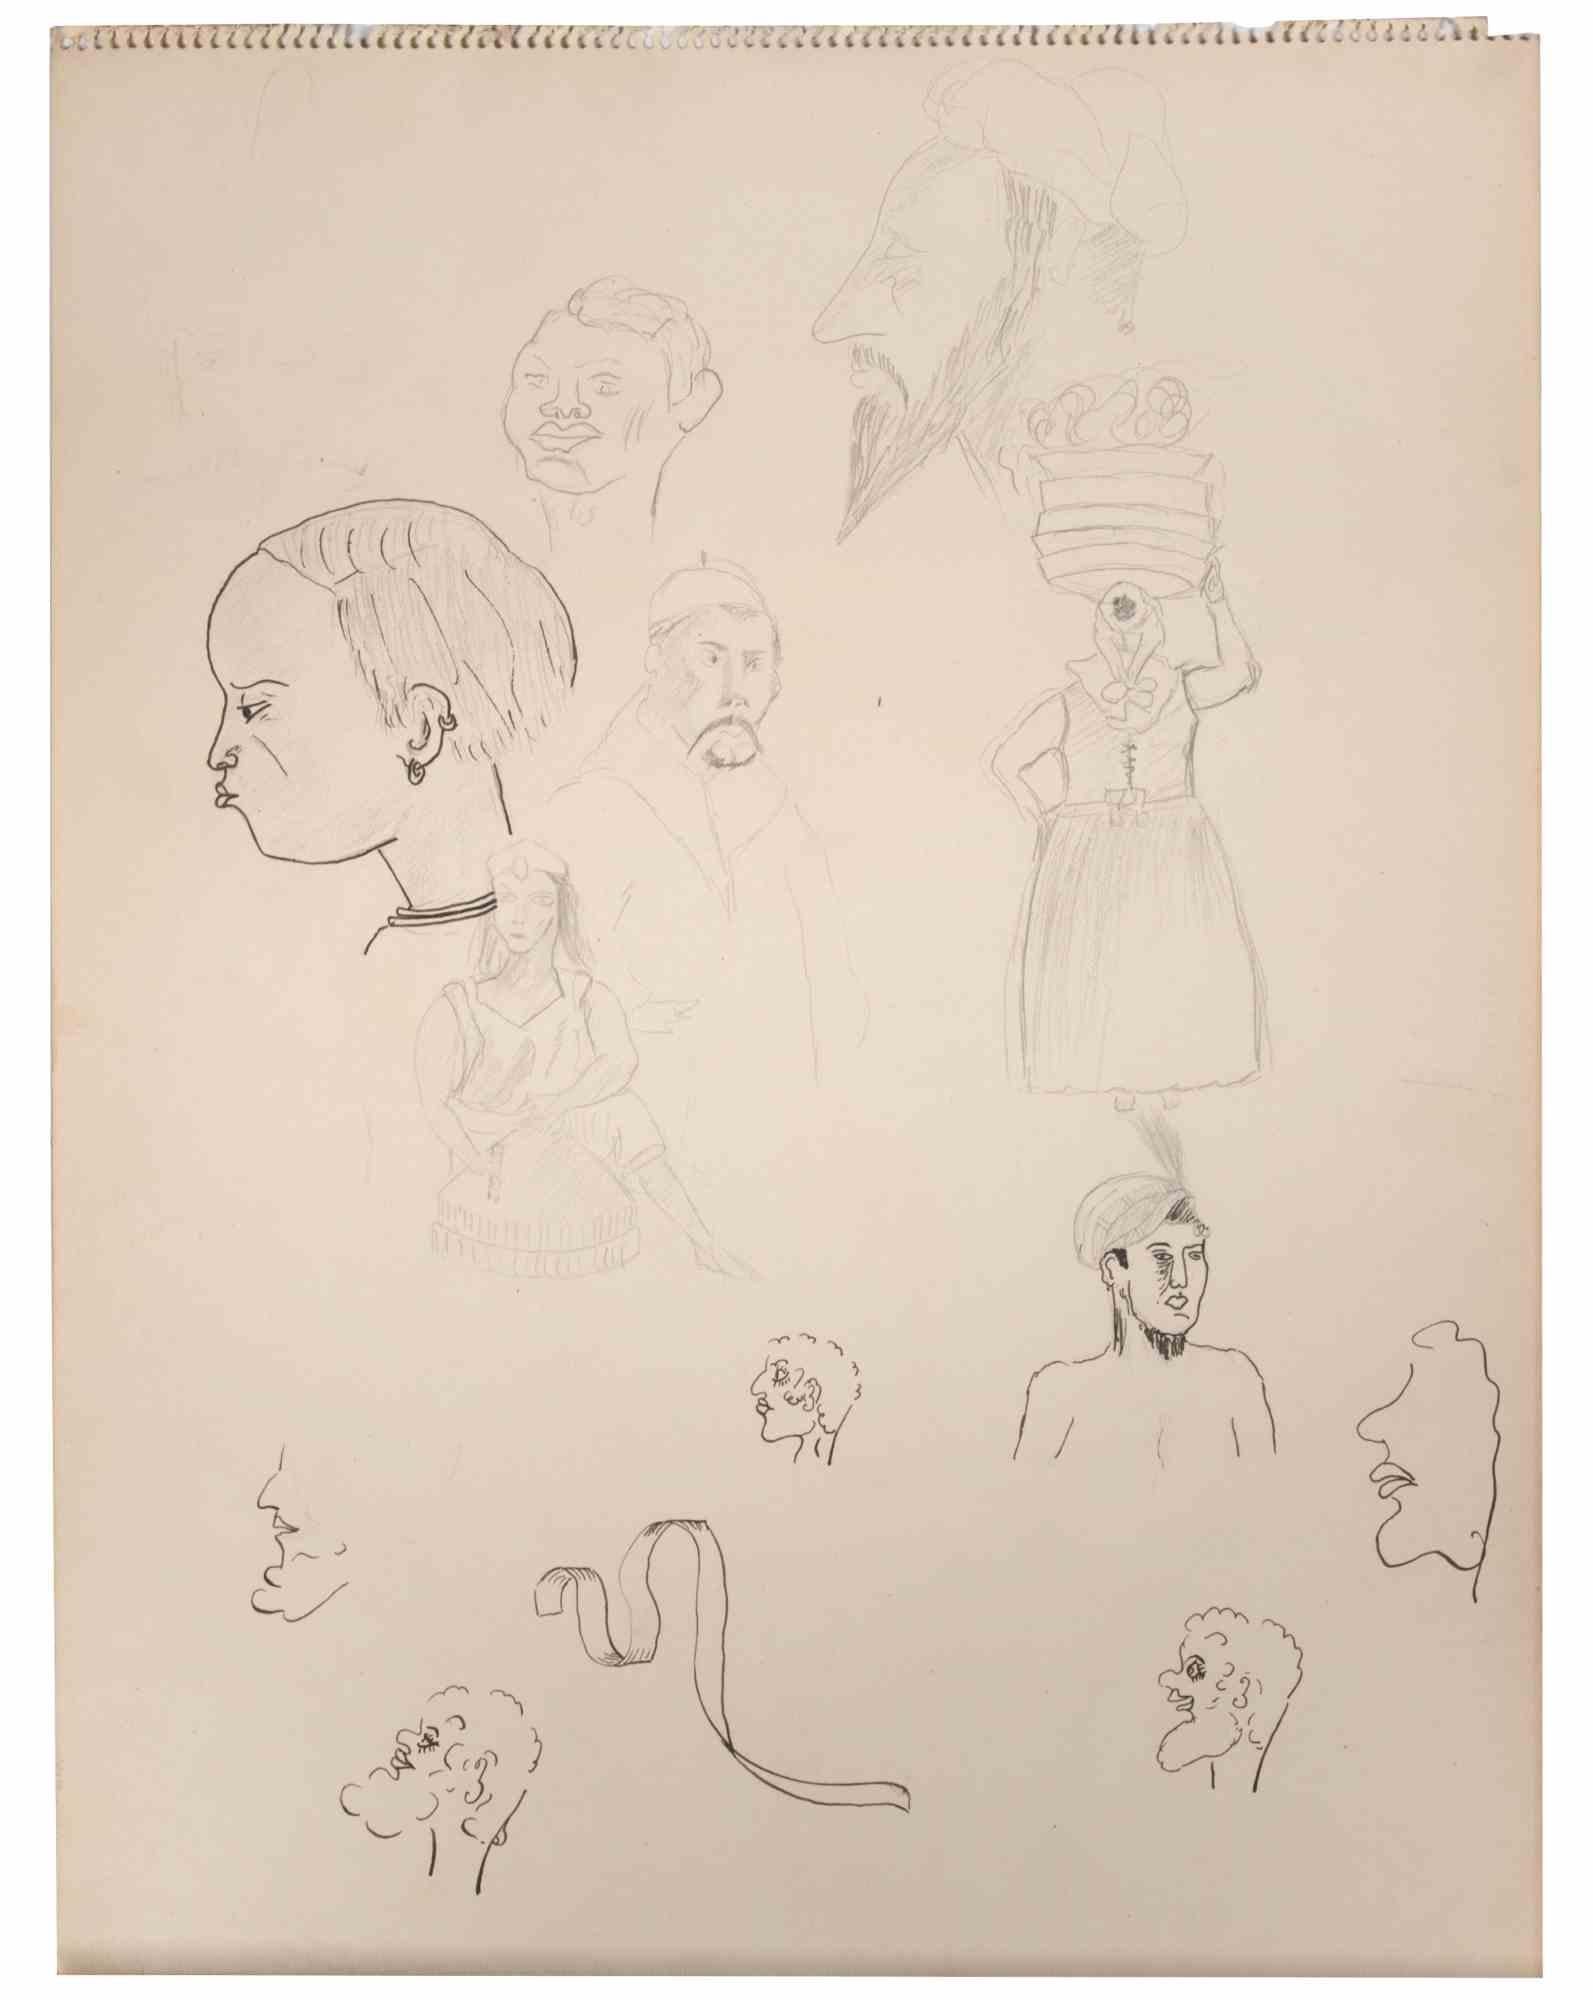 Figures is a drawing realized  by Suzanne Tourte in the Mid 20th Century.

Pencil on paper.

In good conditions.

The artwork is represented through deft strokes masterly.